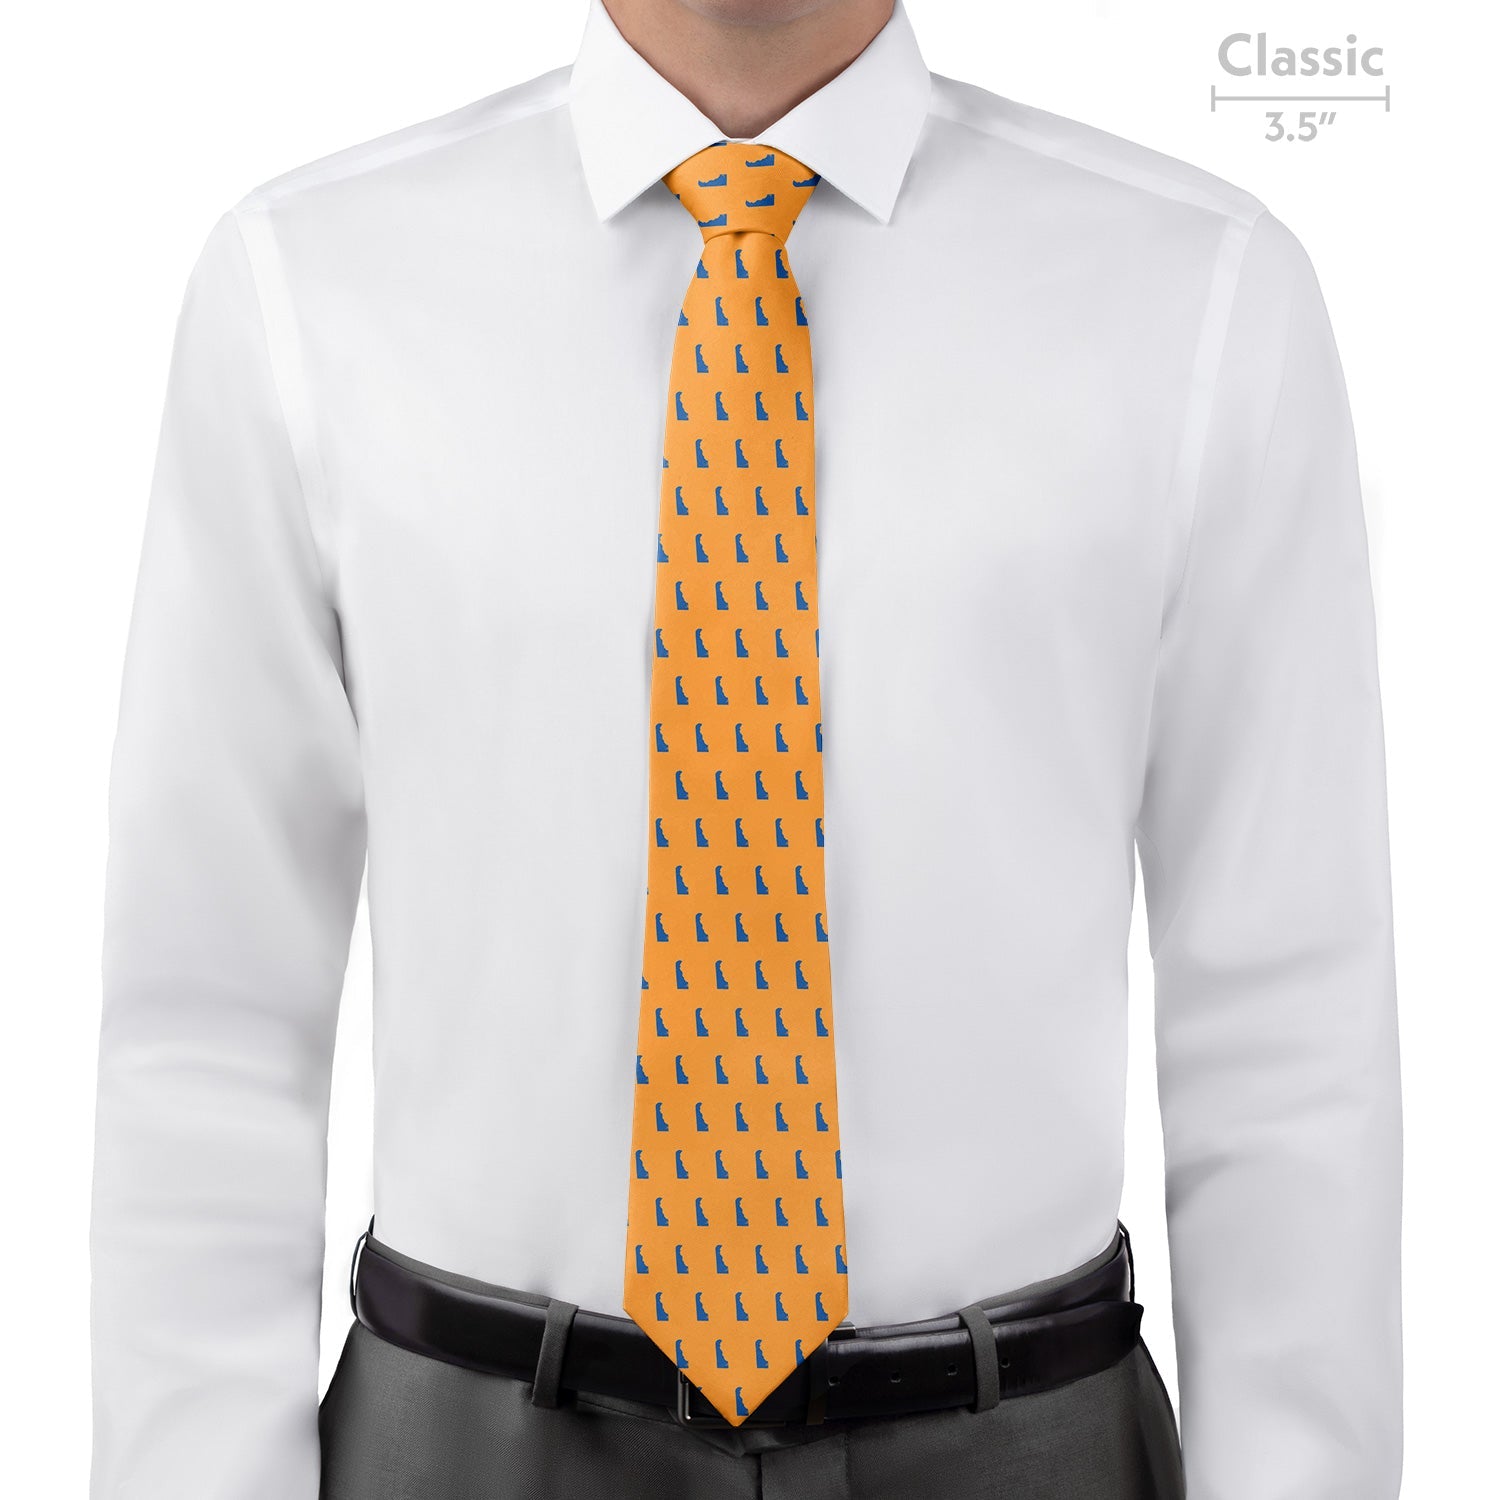 Delaware State Outline Necktie - Classic 3.5" -  - Knotty Tie Co.